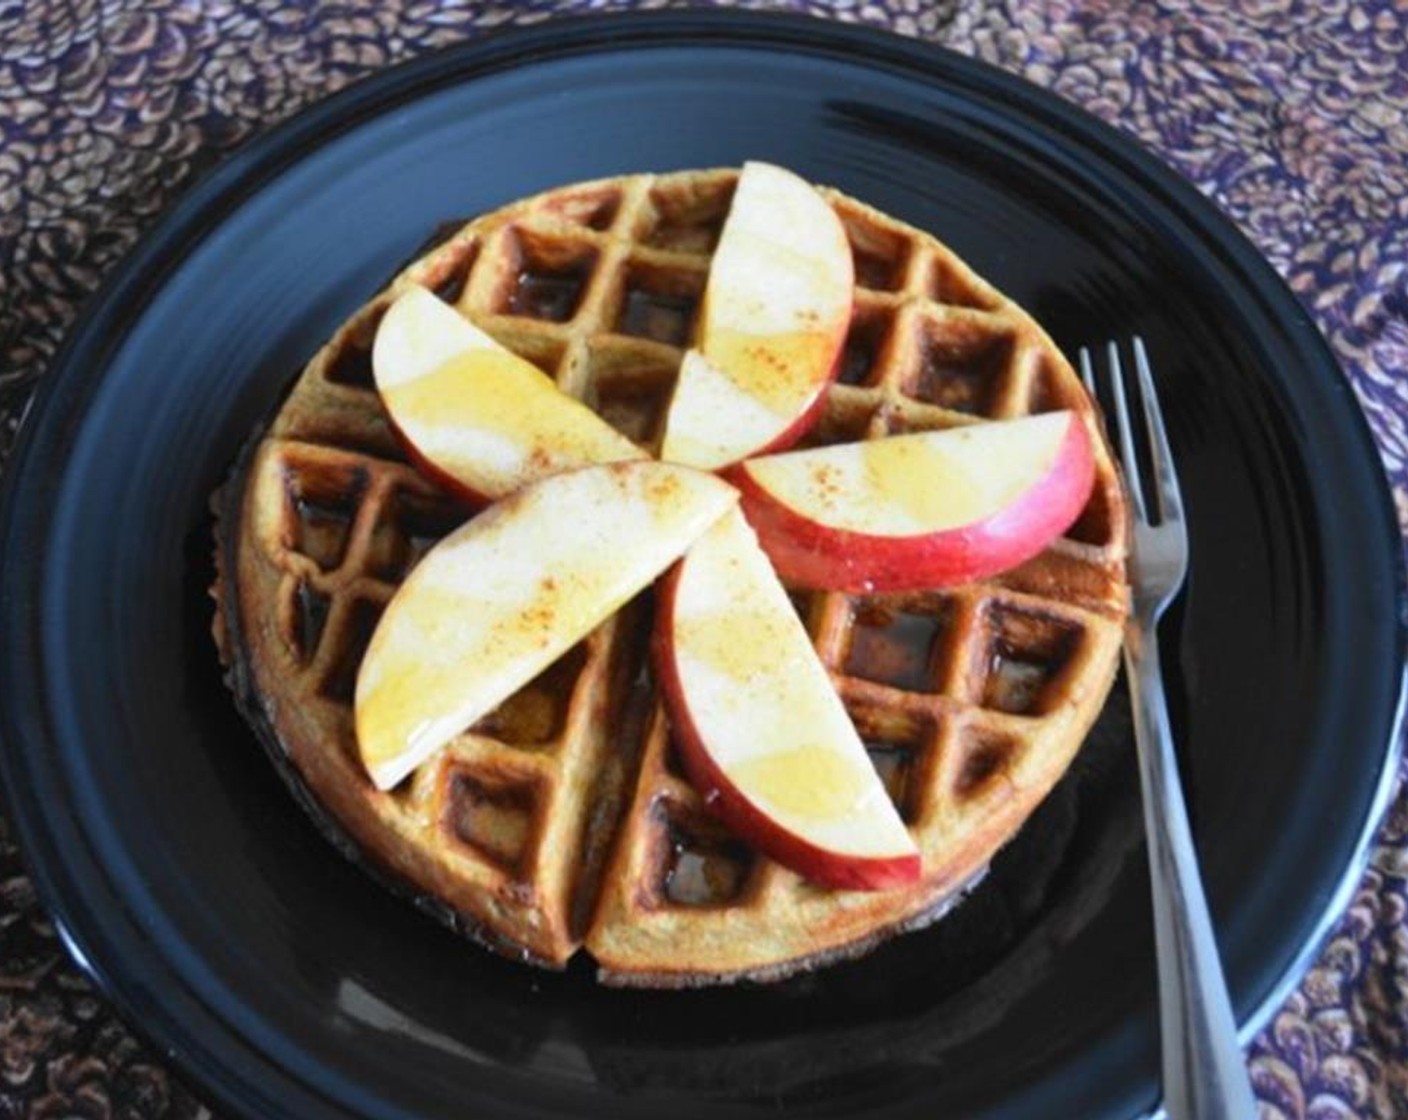 step 8 Dress the waffles with Apples (to taste), a sprinkle of cinnamon and Maple Syrup (to taste). Serve them up and enjoy a yummy, healthy breakfast!